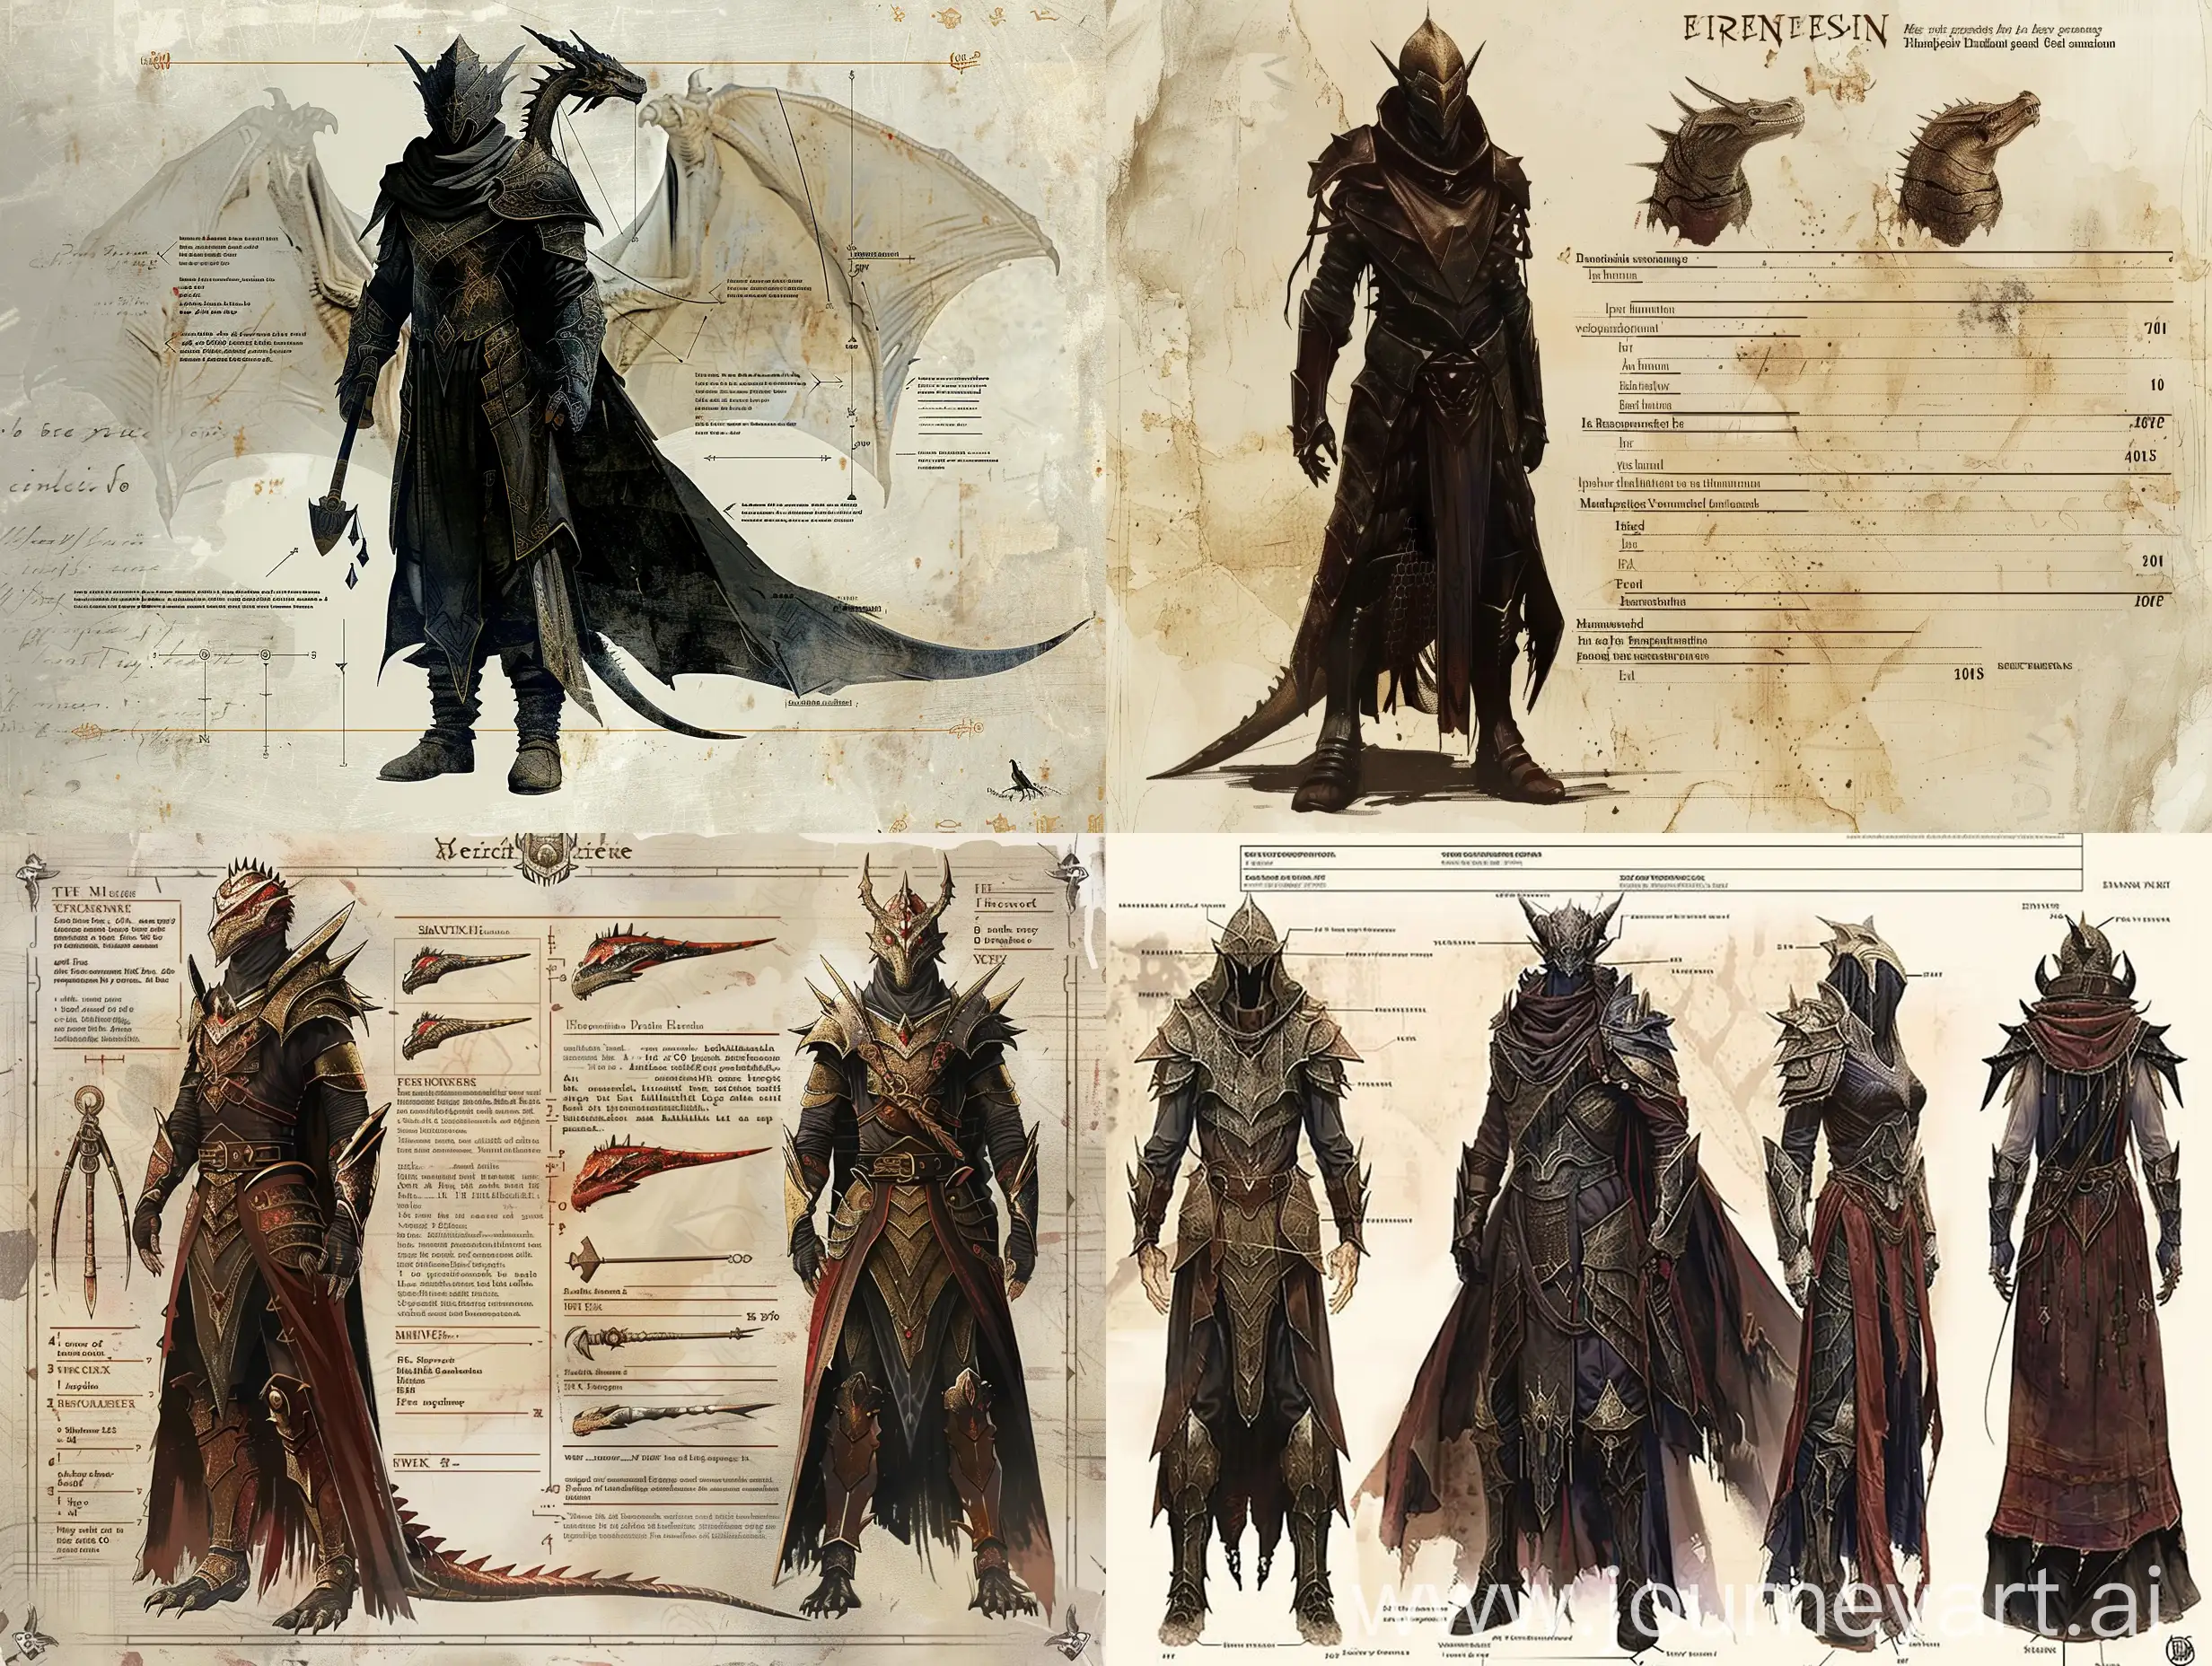 magazine, statistics, lines indicating clothing and equipment, a detailed description of one character from a dark epic fantasy, dragonborn, sorcerer, many details